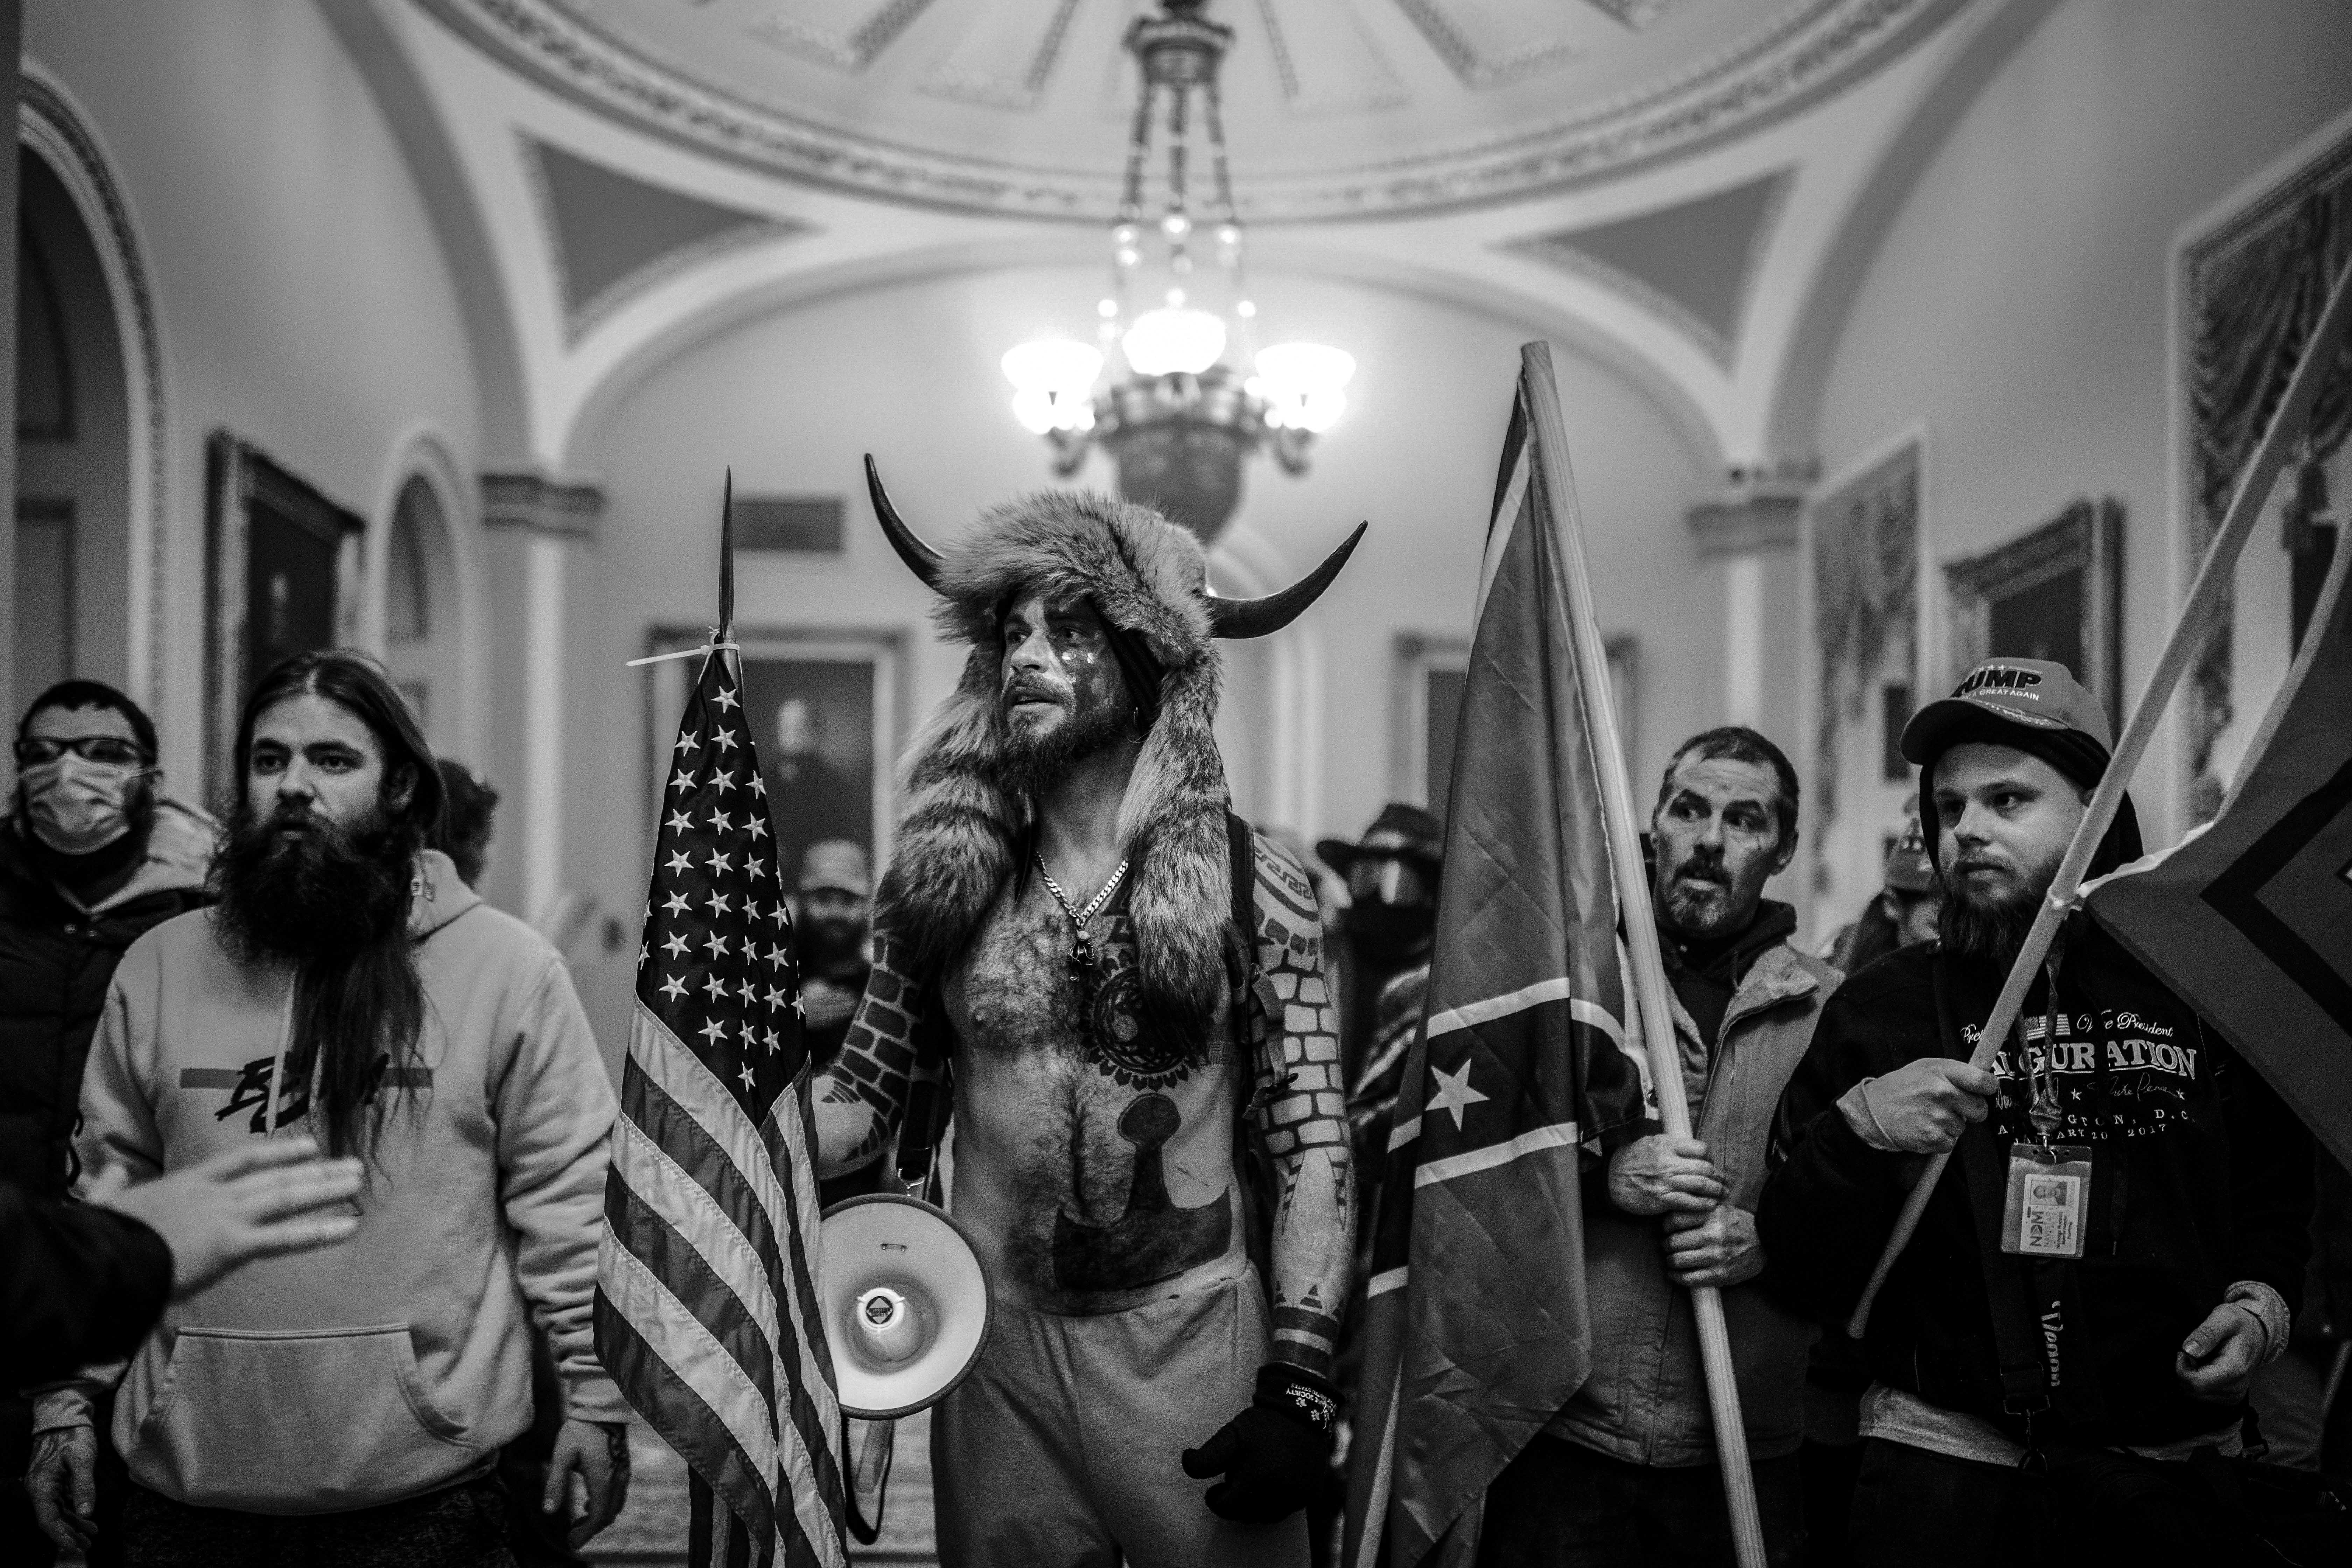 Jake Angeli, self described QAnon Shamen, confronts police officers as a pro-Trump mob storms the Capitol in Washington, D.C. after listening to a speech by President Trump on January 6, 2021. A large mob who convened on Washington, D.C. for a ?Save America? or ?Stop the Steal? rally was incited by President Trump and stormed the United States Capitol building, fighting with police, and damaging offices and rooms as they made their way through the building. As President Trump openly condoned the violence, the D.C, mayor called for a 6 p.m. curfew, and mobilized the National Guard. (Photo by Ashley Gilbertson / VII Photo)